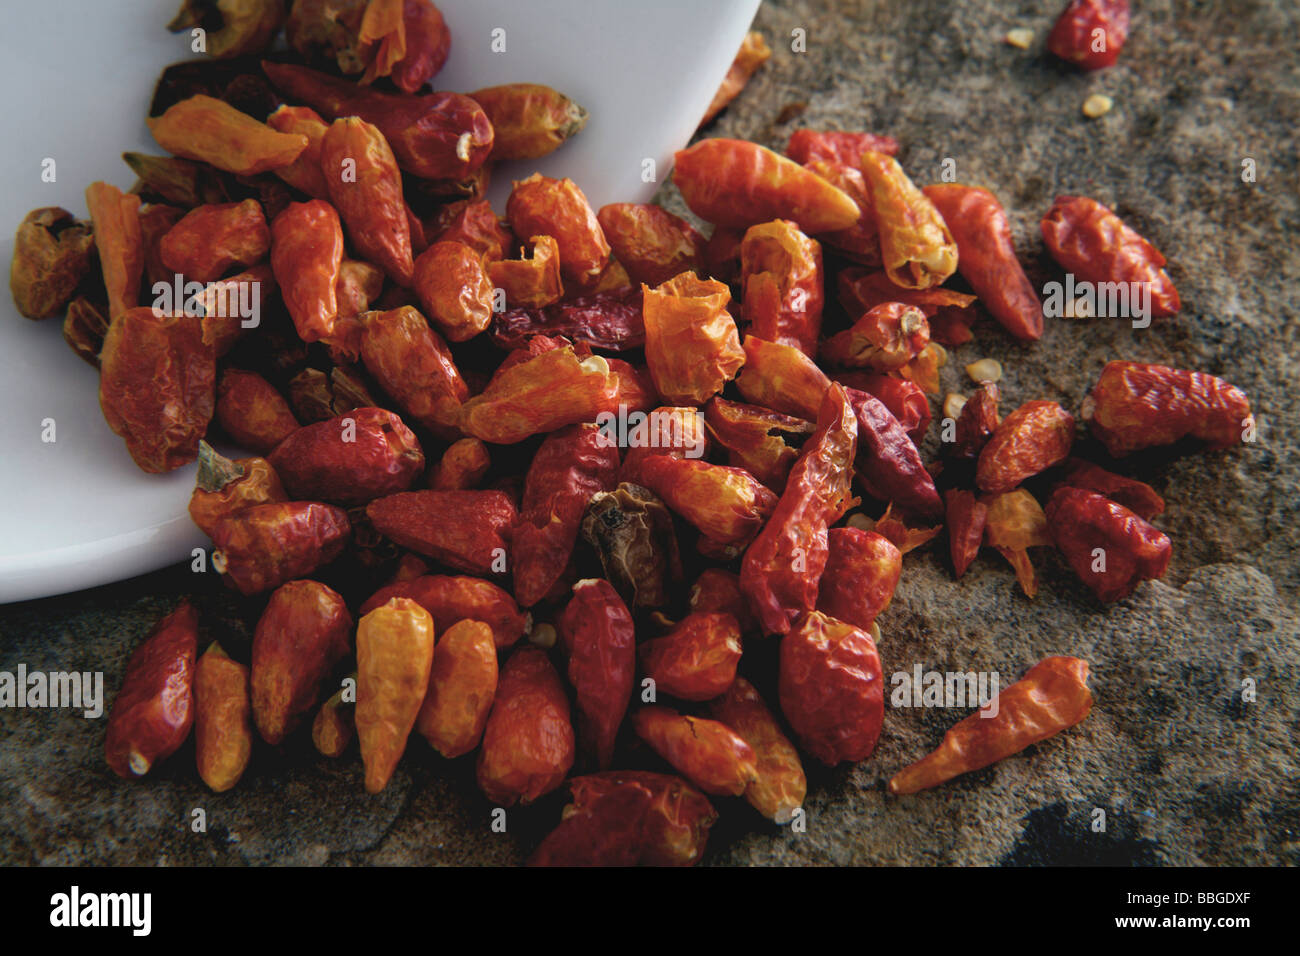 Dried chili peppers tipped from a bowl Stock Photo